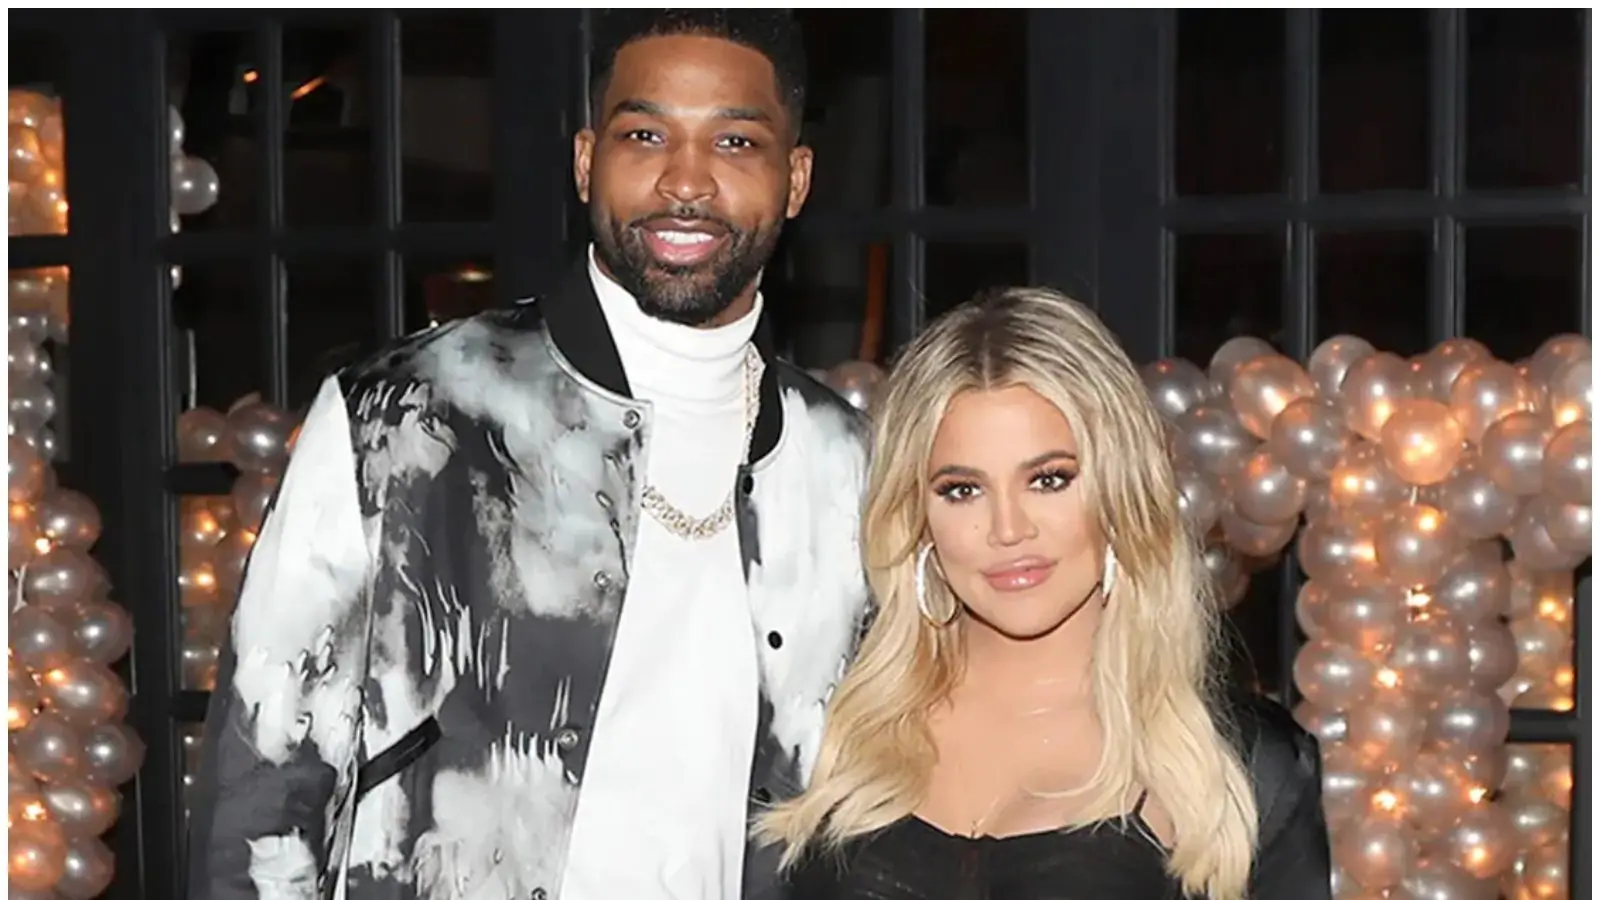 Khloe Kardashian And Private Equity Investor Split After Former Welcomed Baby With Tristan Thompson